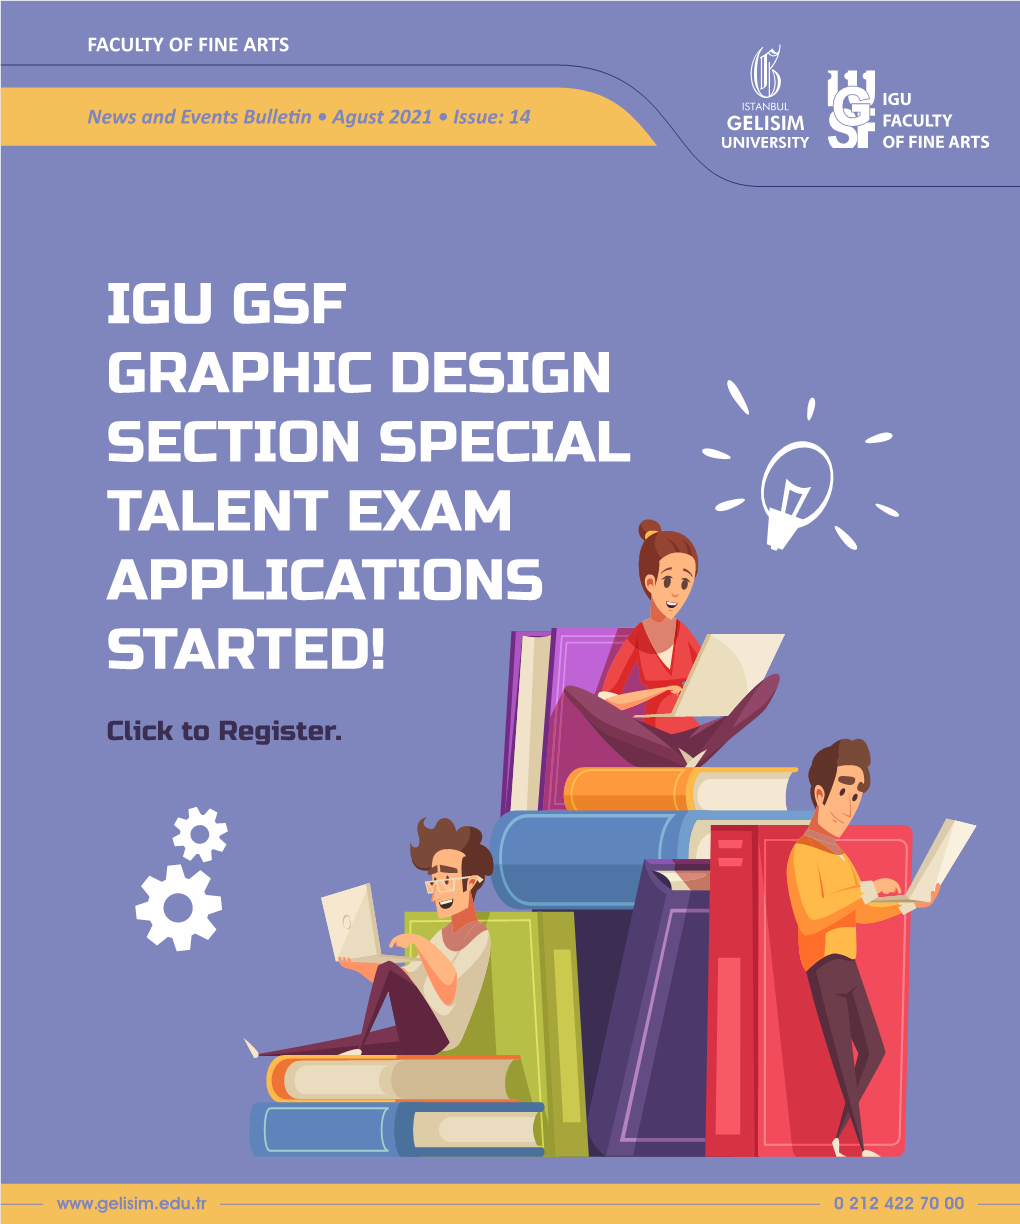 Igu Gsf Graphic Design Section Special Talent Exam Applications Started!